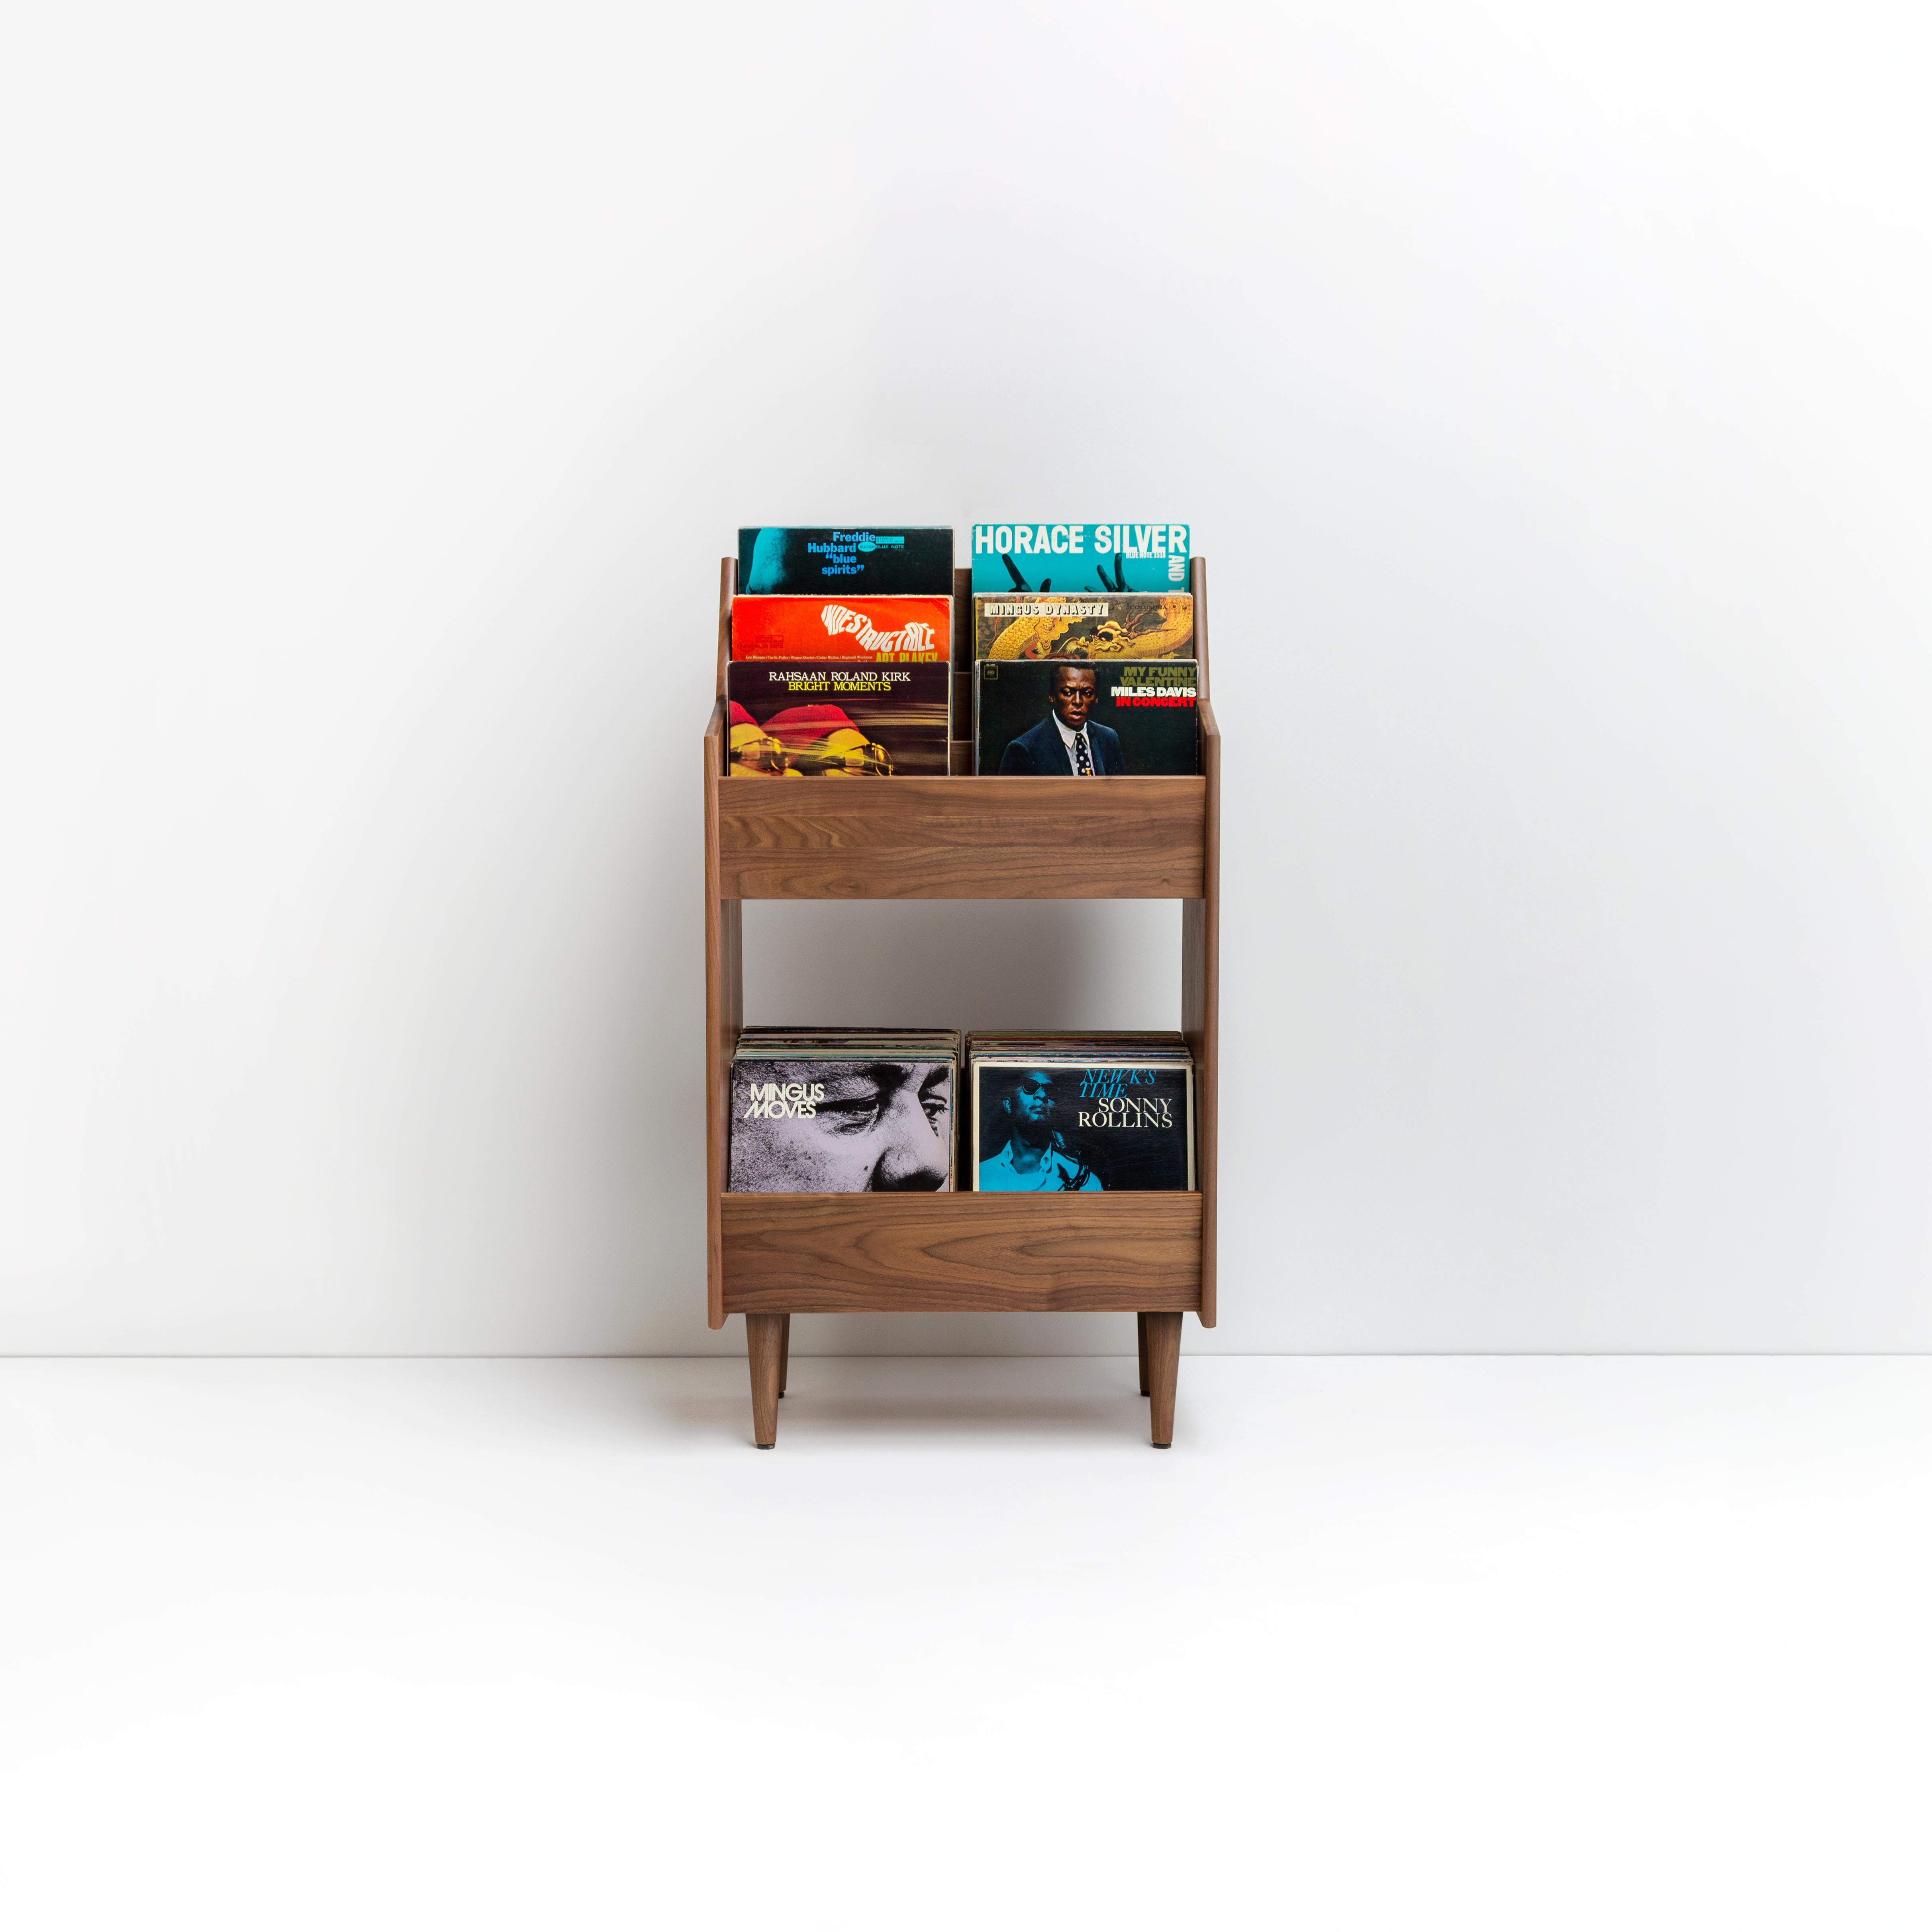 Luxe record stands elegantly display record cover art while providing easy access to as many as 350 records. All of our cabinets are hand-built in the United States from sustainably harvested solid Ash and Walnut, available in a range of finishes.